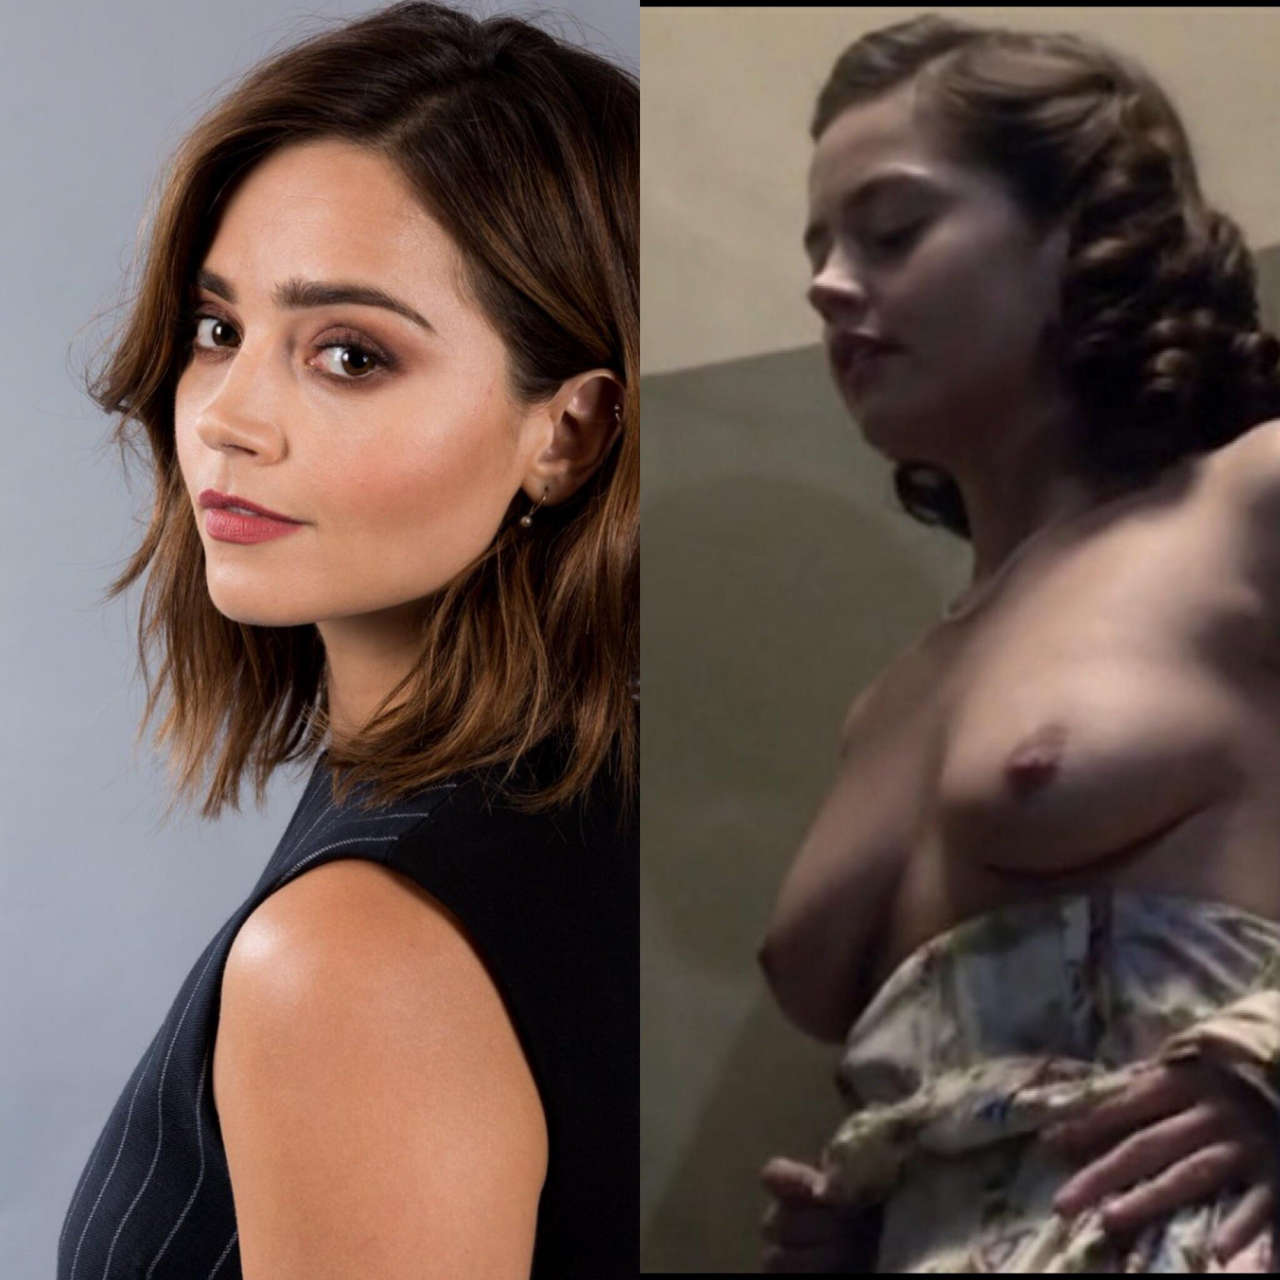 The Sexiest Brit U Didnt Know About Jenna Coleman NSFW NSFW